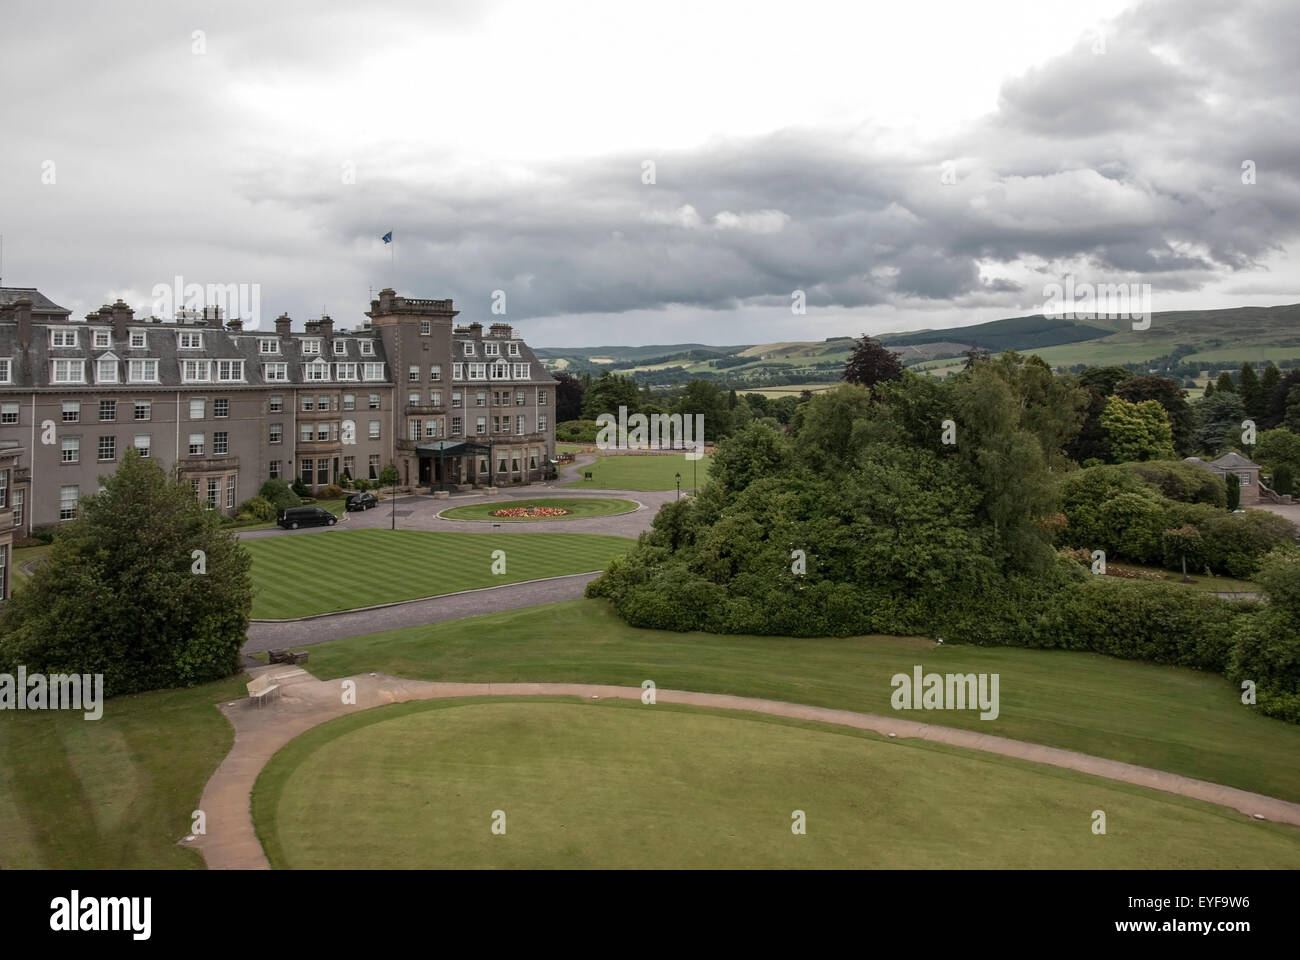 The Driveway and Entrance to Gleneagles Hotel Stock Photo